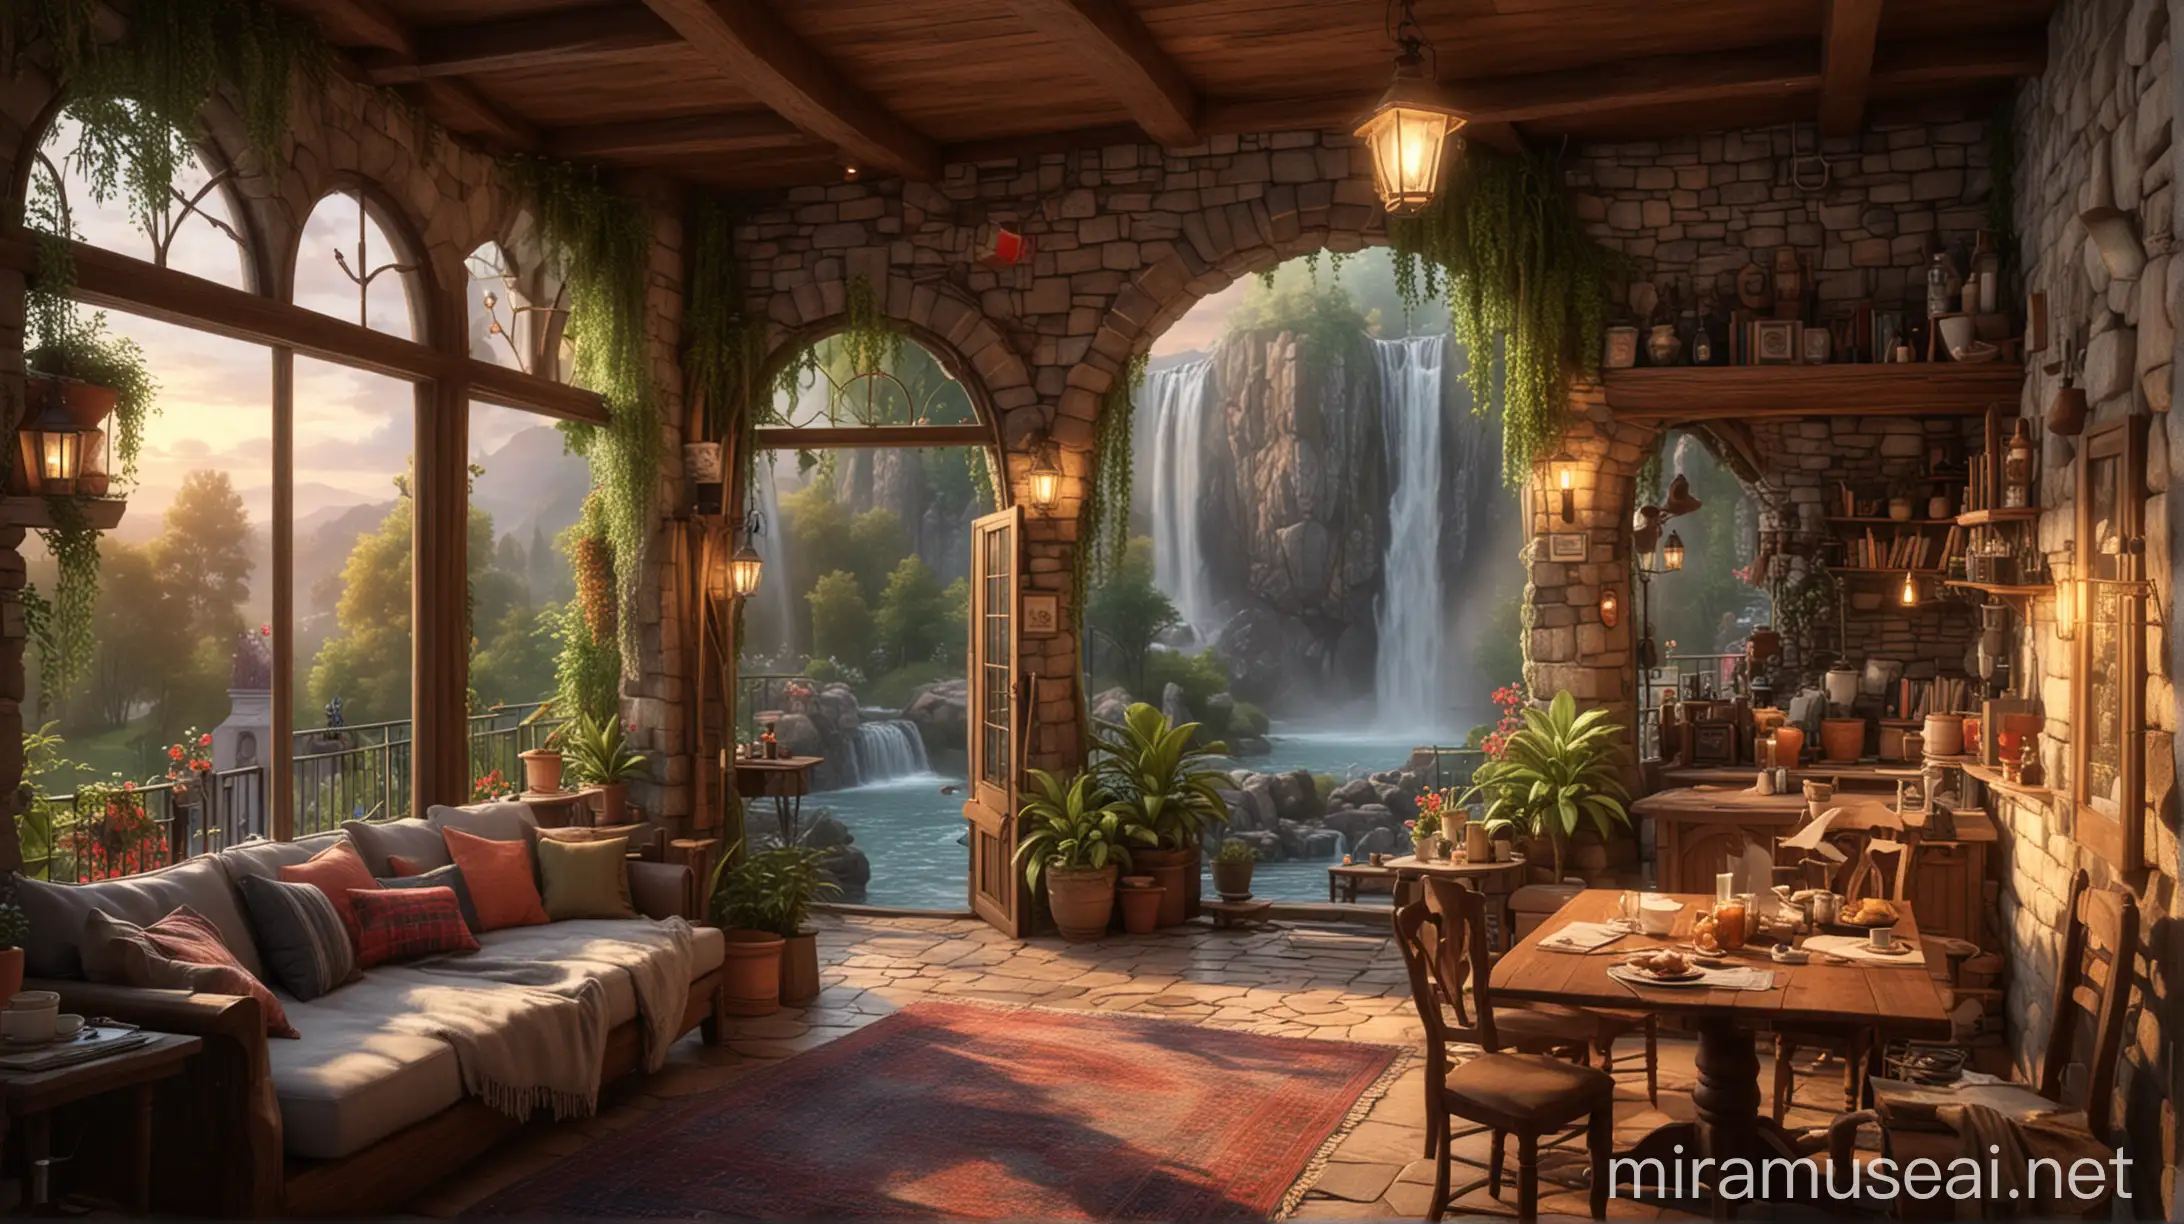 a living room with a waterfall and a waterfall waterfall waterfall waterfall waterfall waterfall waterfall waterfall, cozy place, beautiful terrace, soothing and cozy landscape, cozy and peaceful atmosphere, cozy atmosphere, cosy enchanted scene, cozy setting, cozy home background, inspired by Evgeny Lushpin, beautiful ambiance, cozy castle atmospheric, picture of a loft in morning, cozy environment, relaxing environment, serene evening atmosphere, fantasy matte painting，cute, all in the amazing outdoors view, cozy cafe background, dream scenery art, thomas kinkade. cute cozy room
